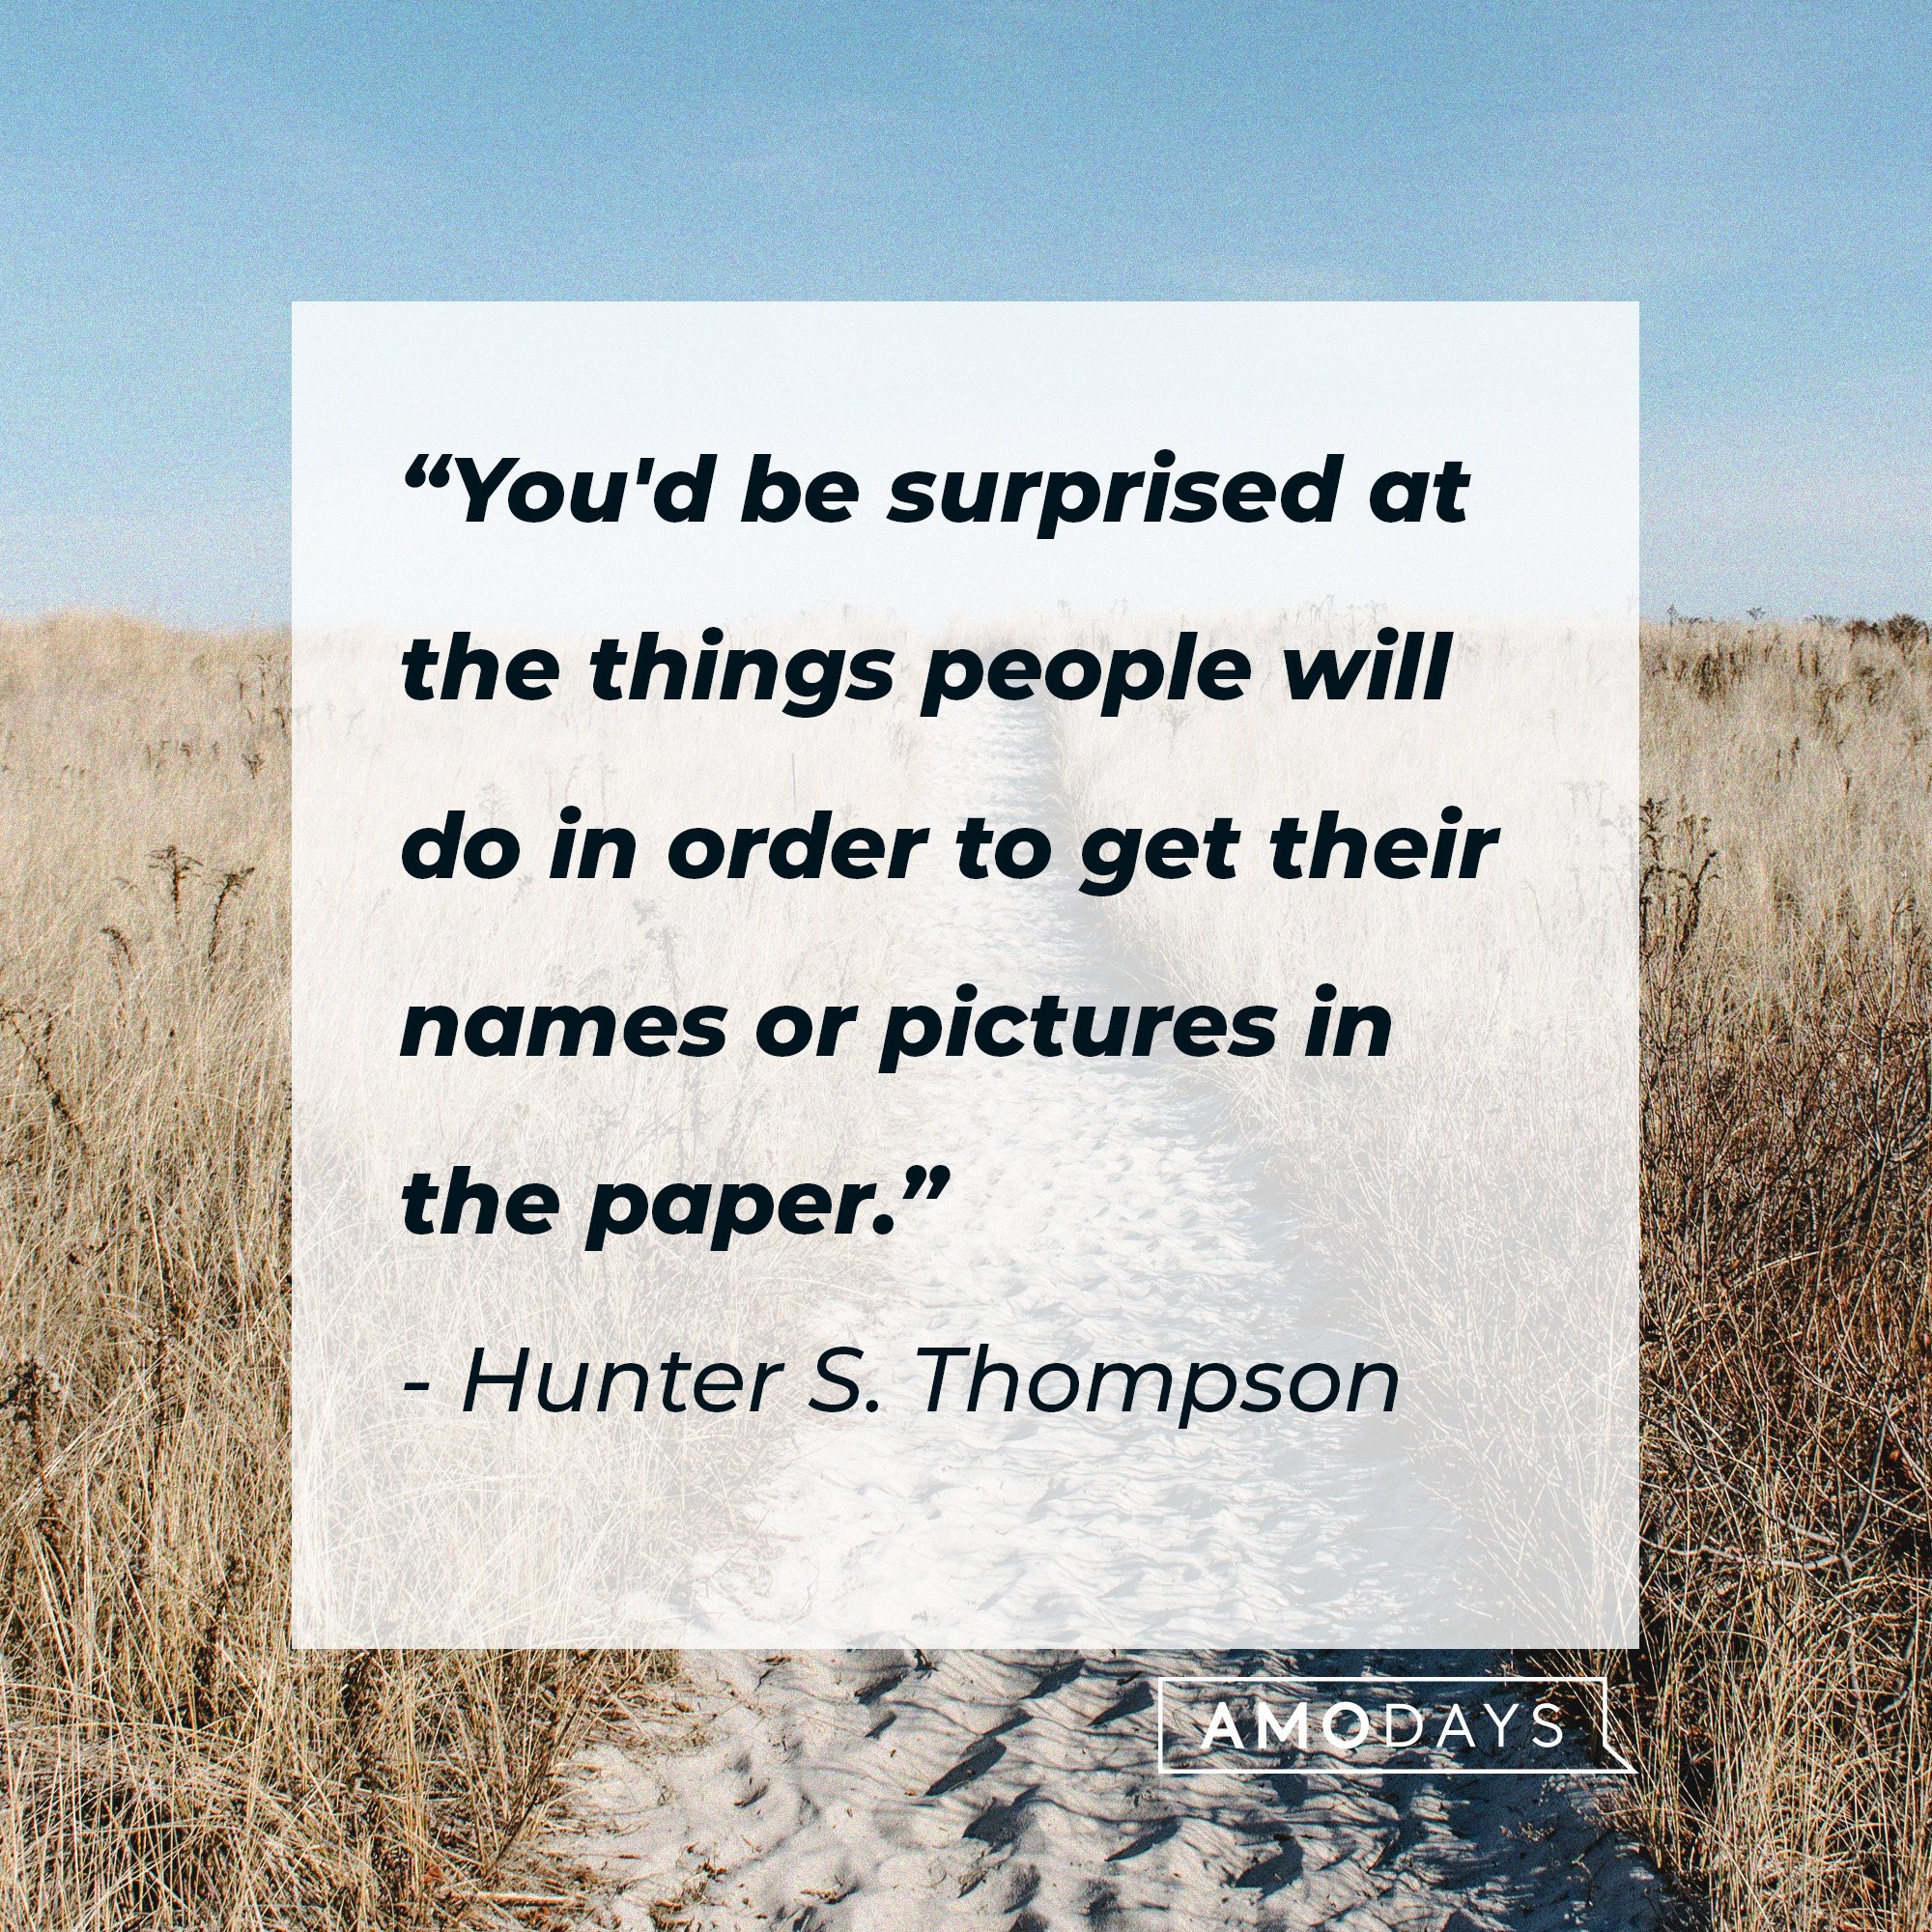 Hunter S. Thompson’s quote: “You'd be surprised at the things people will do in order to get their names or pictures in the paper.” | Image: AmoDays